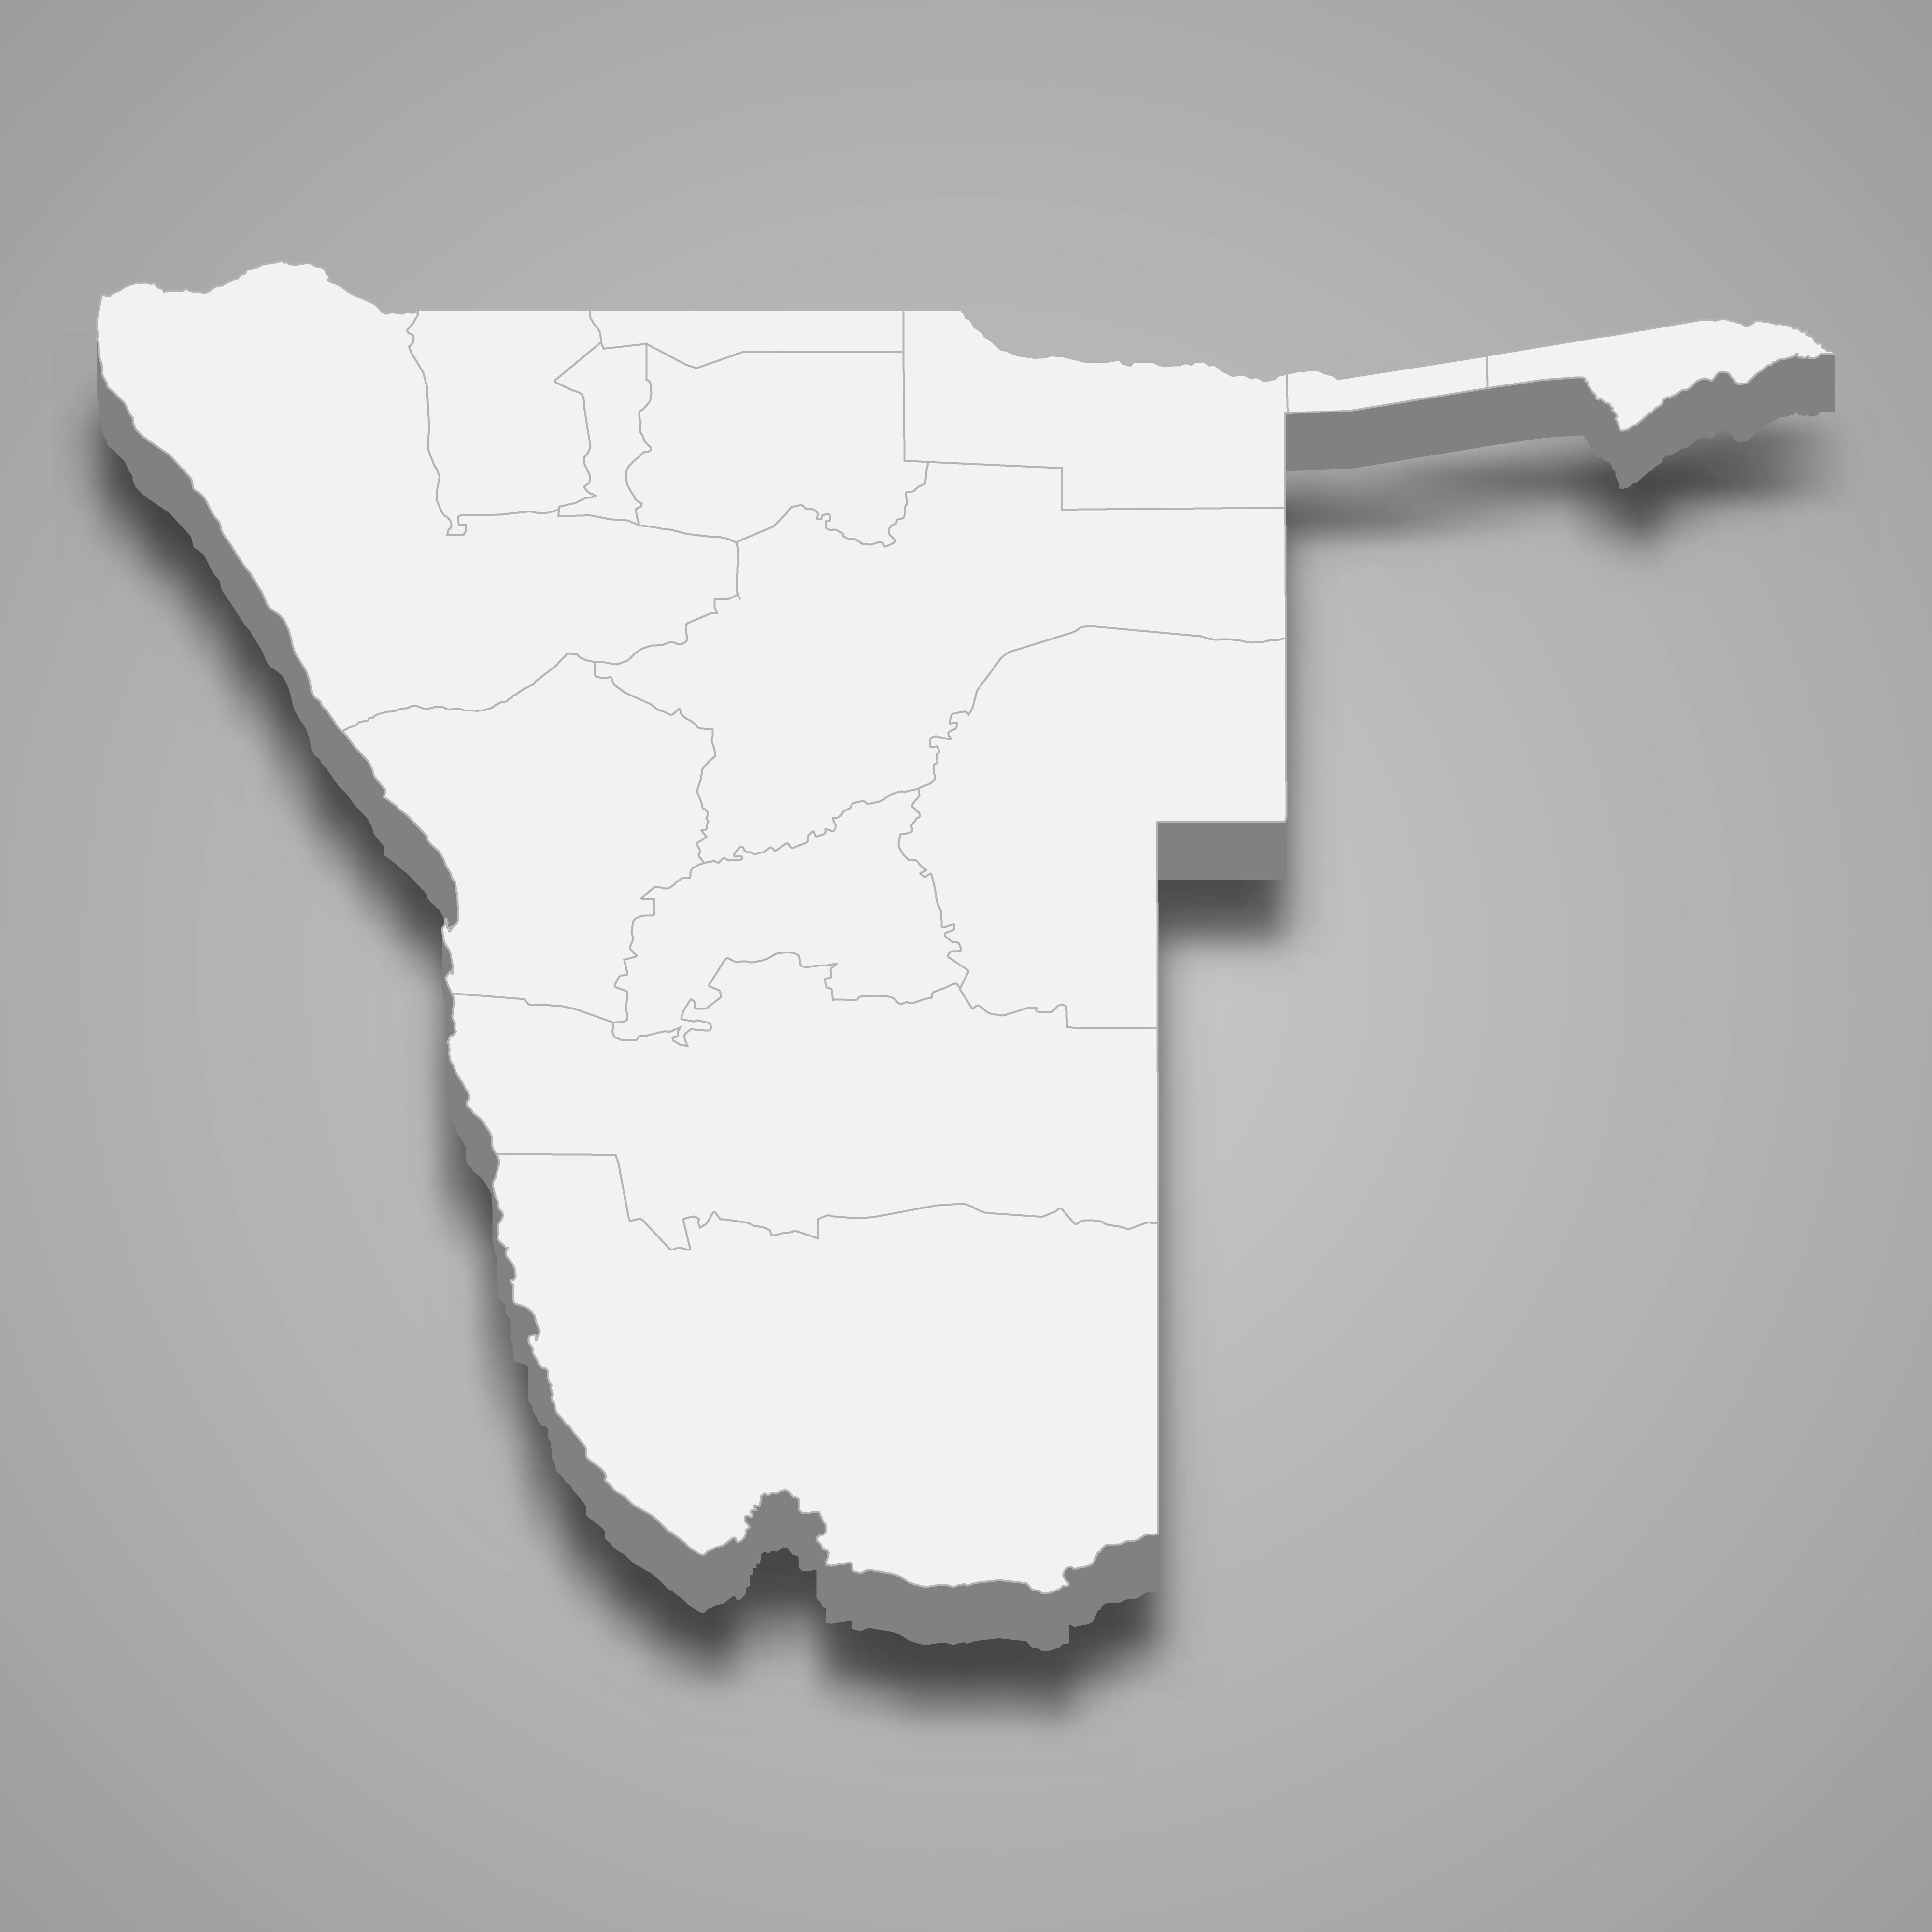 3d map of Namibia with borders of regions. 3d map with borders of regions Template for your design